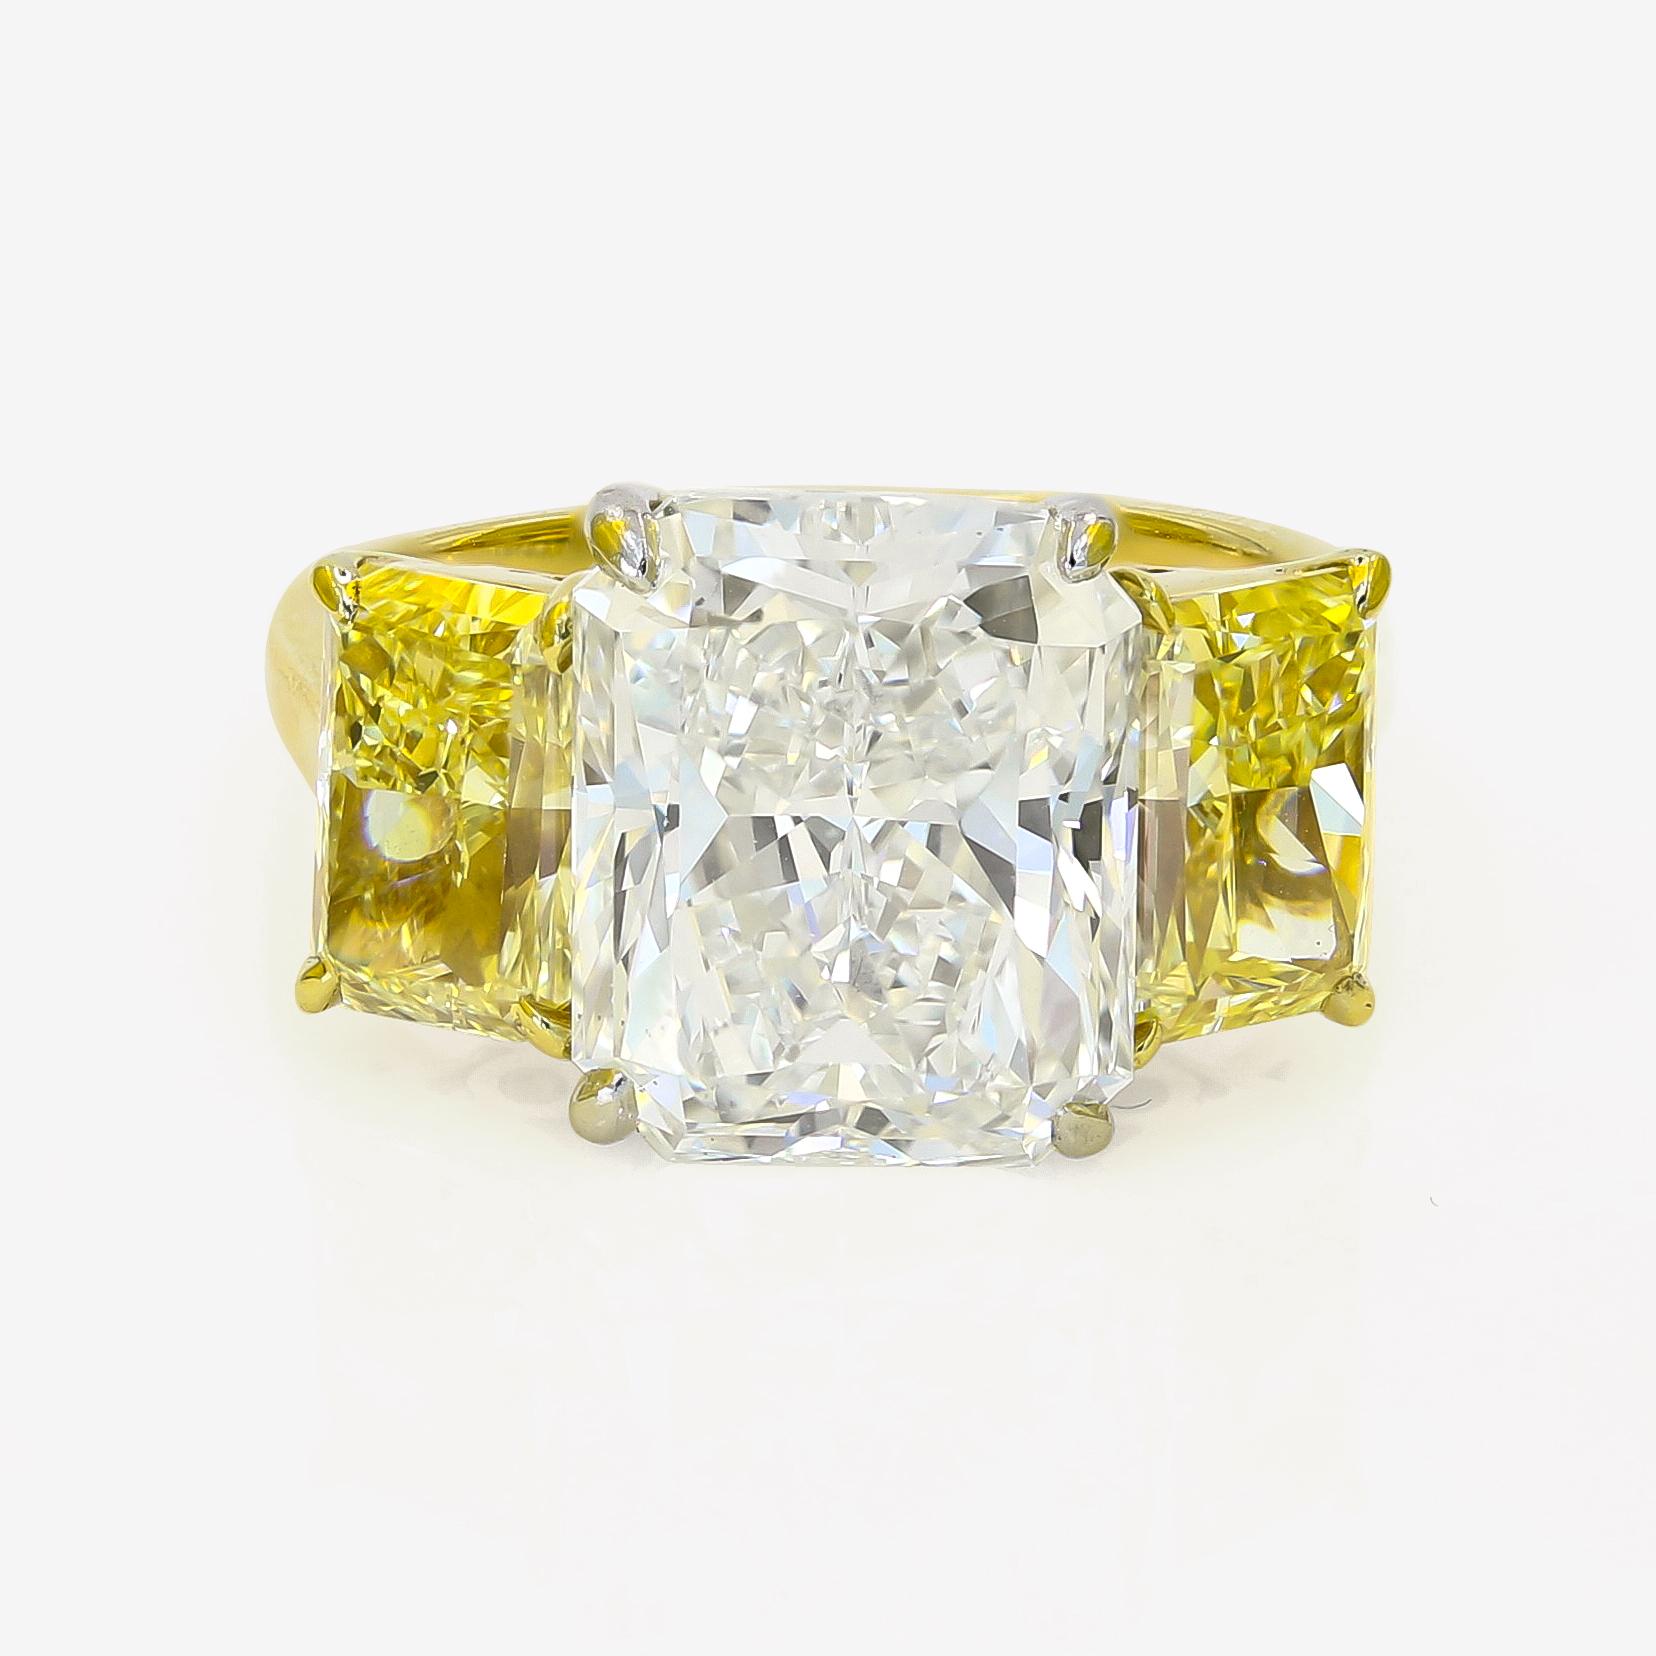 This stunning Lester Lampert original is an eye catcher!  The 6.00cts. radiant cut center is I in color and VS2 in clarity. It has two fancy yellow radiant cut diamonds, one on each side, that total 3.09cts. t.w. The center diamond is set in